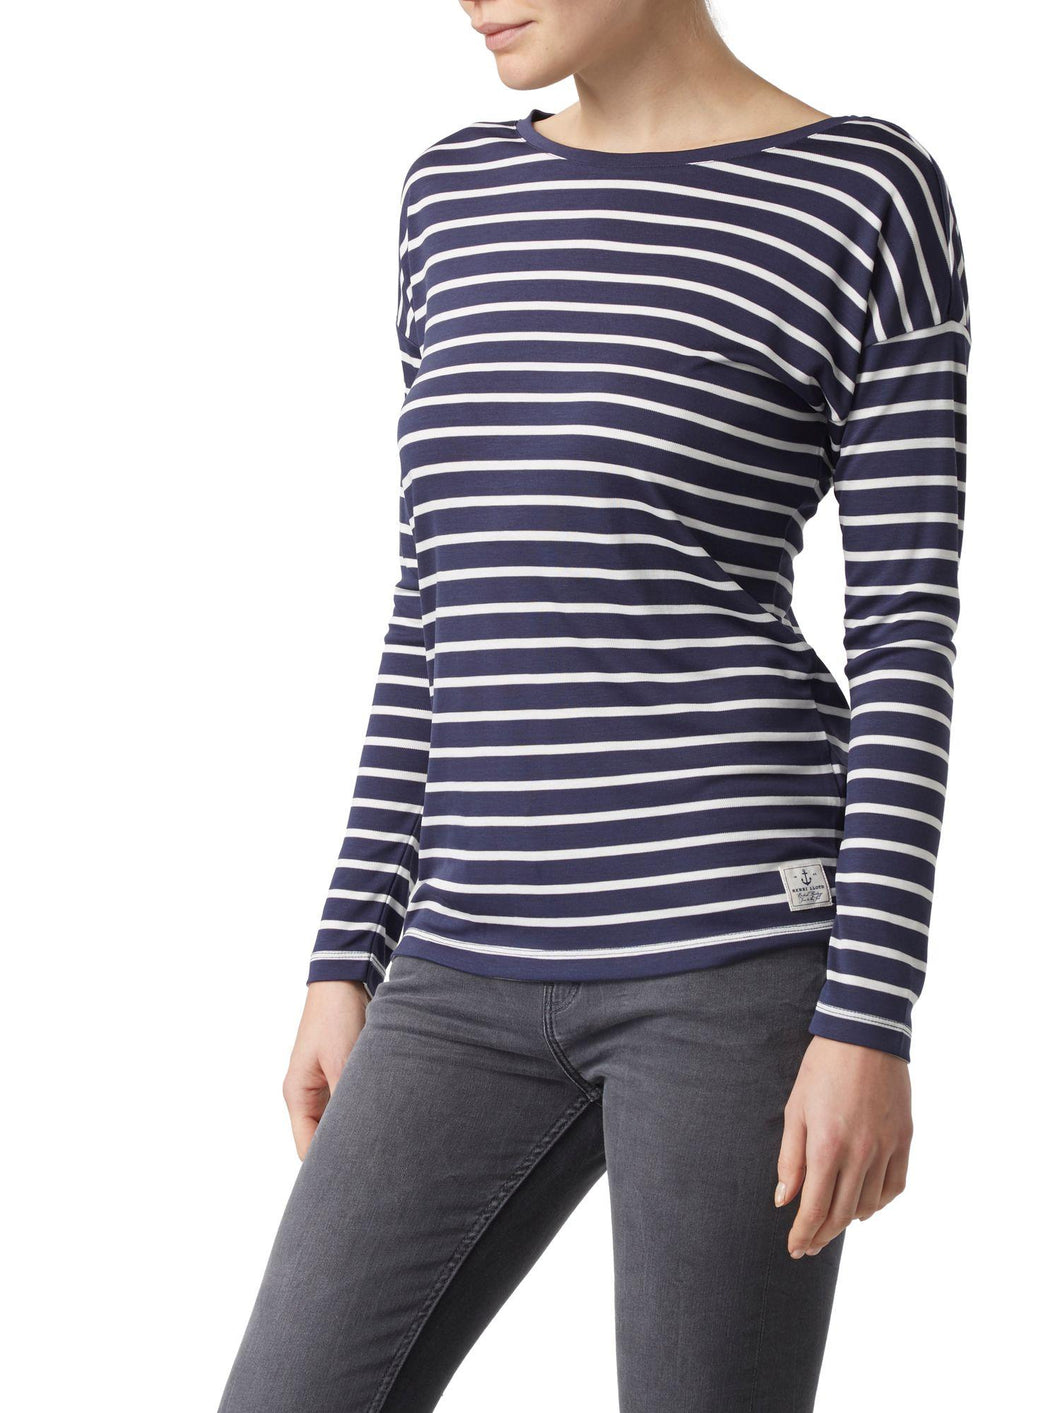 HENRI LLOYD BREANNA STRIPED TOP - ONLY SIZES XSMALL  & XLARGE REMAINING